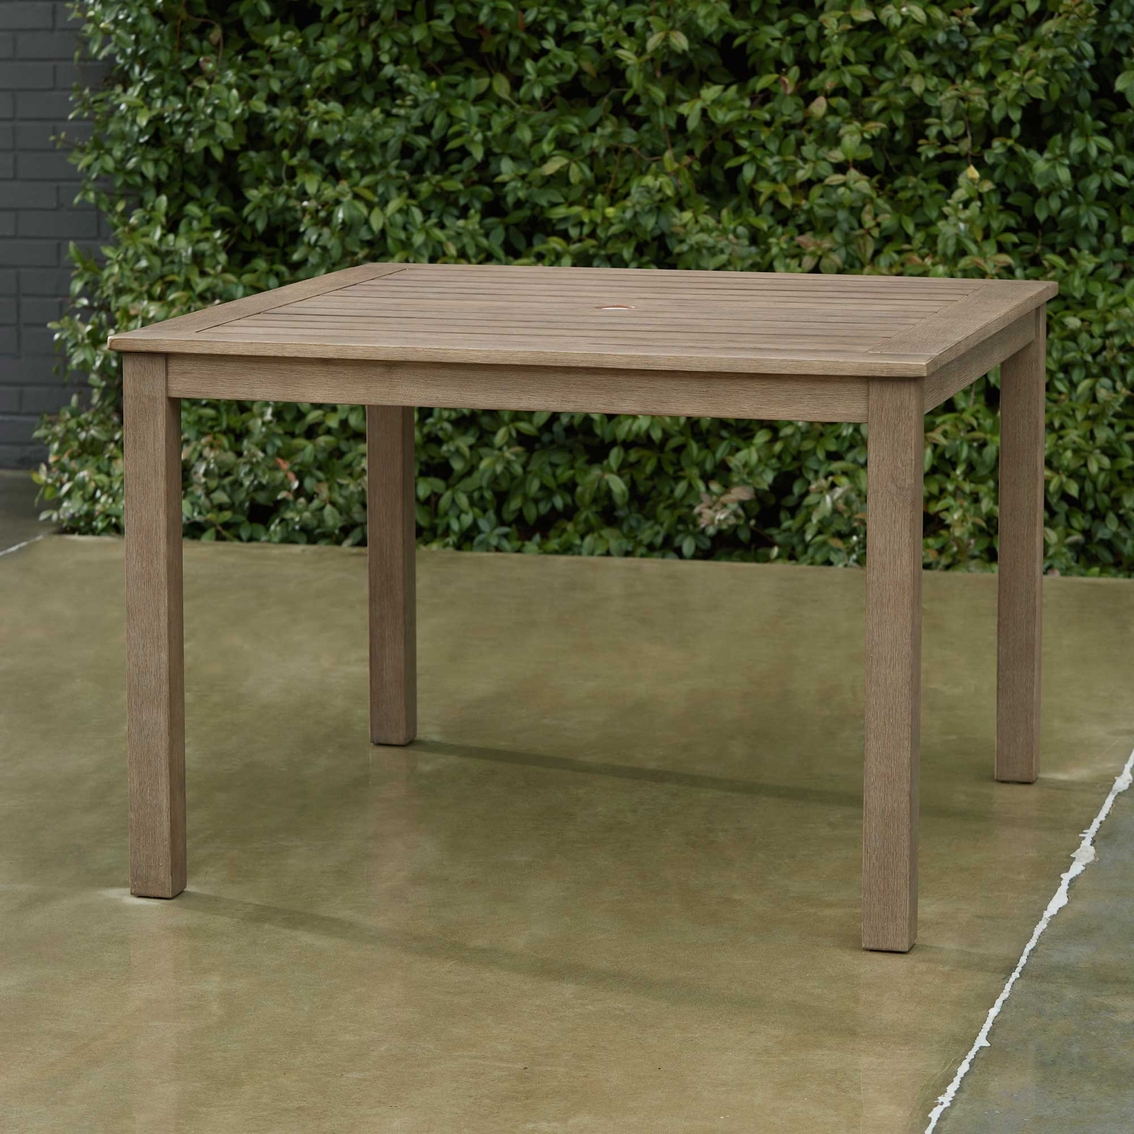 Signature Design by Ashley Aria Plains Outdoor Dining Table - Image 4 of 5